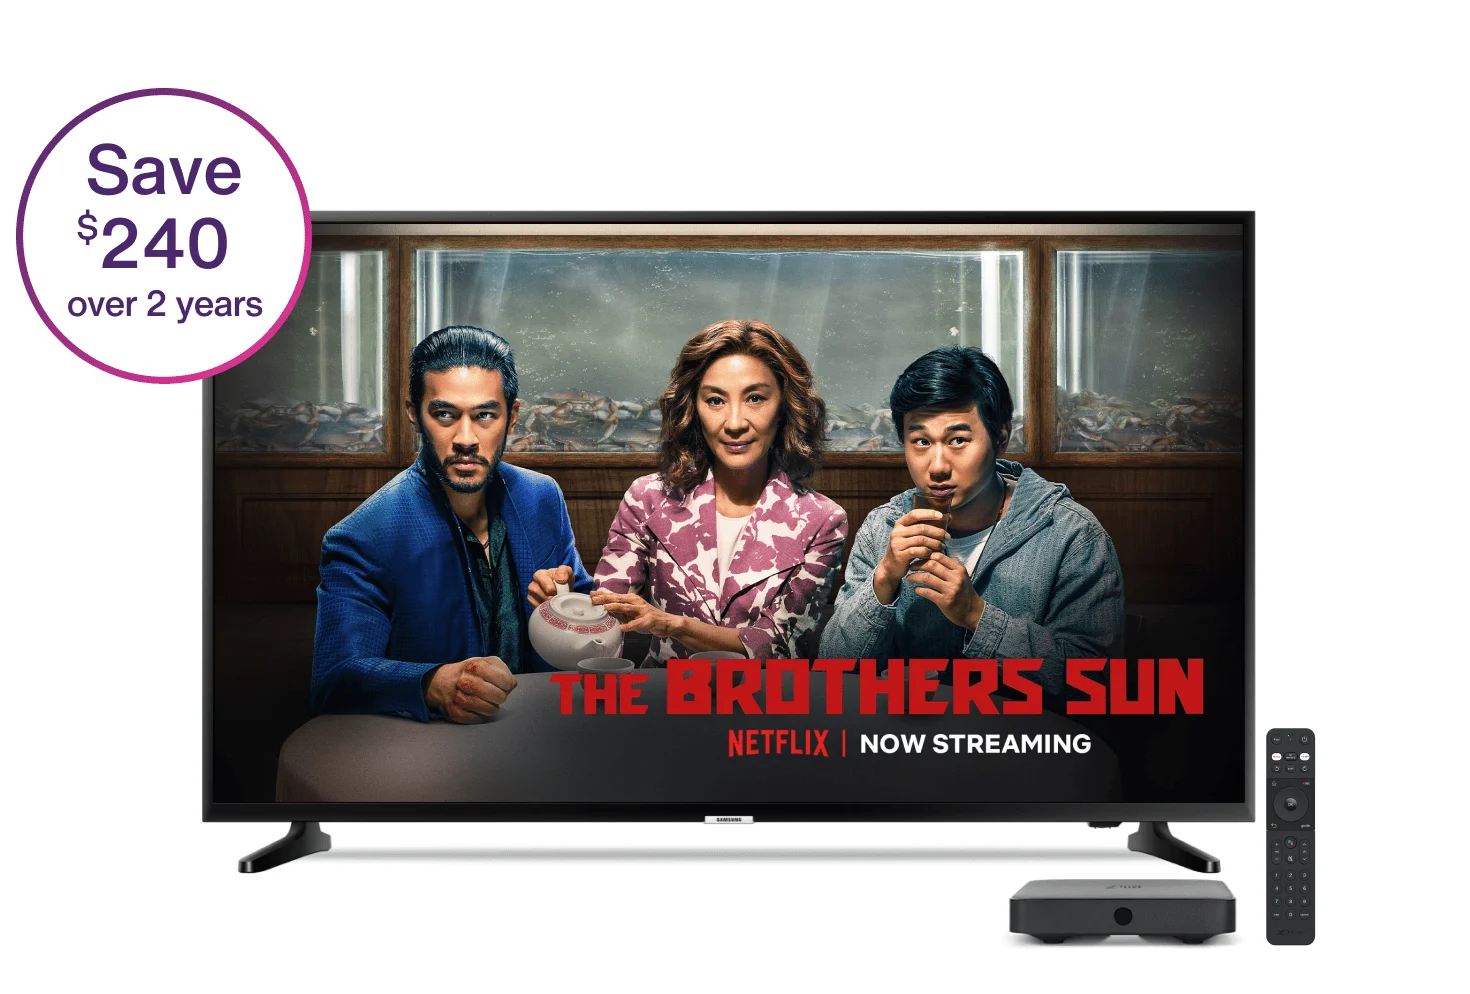 An image of a TV showing The Brothers Sun show on Netflix and a TELUS TV box with a roundel saying "Save $240 over 2 years".